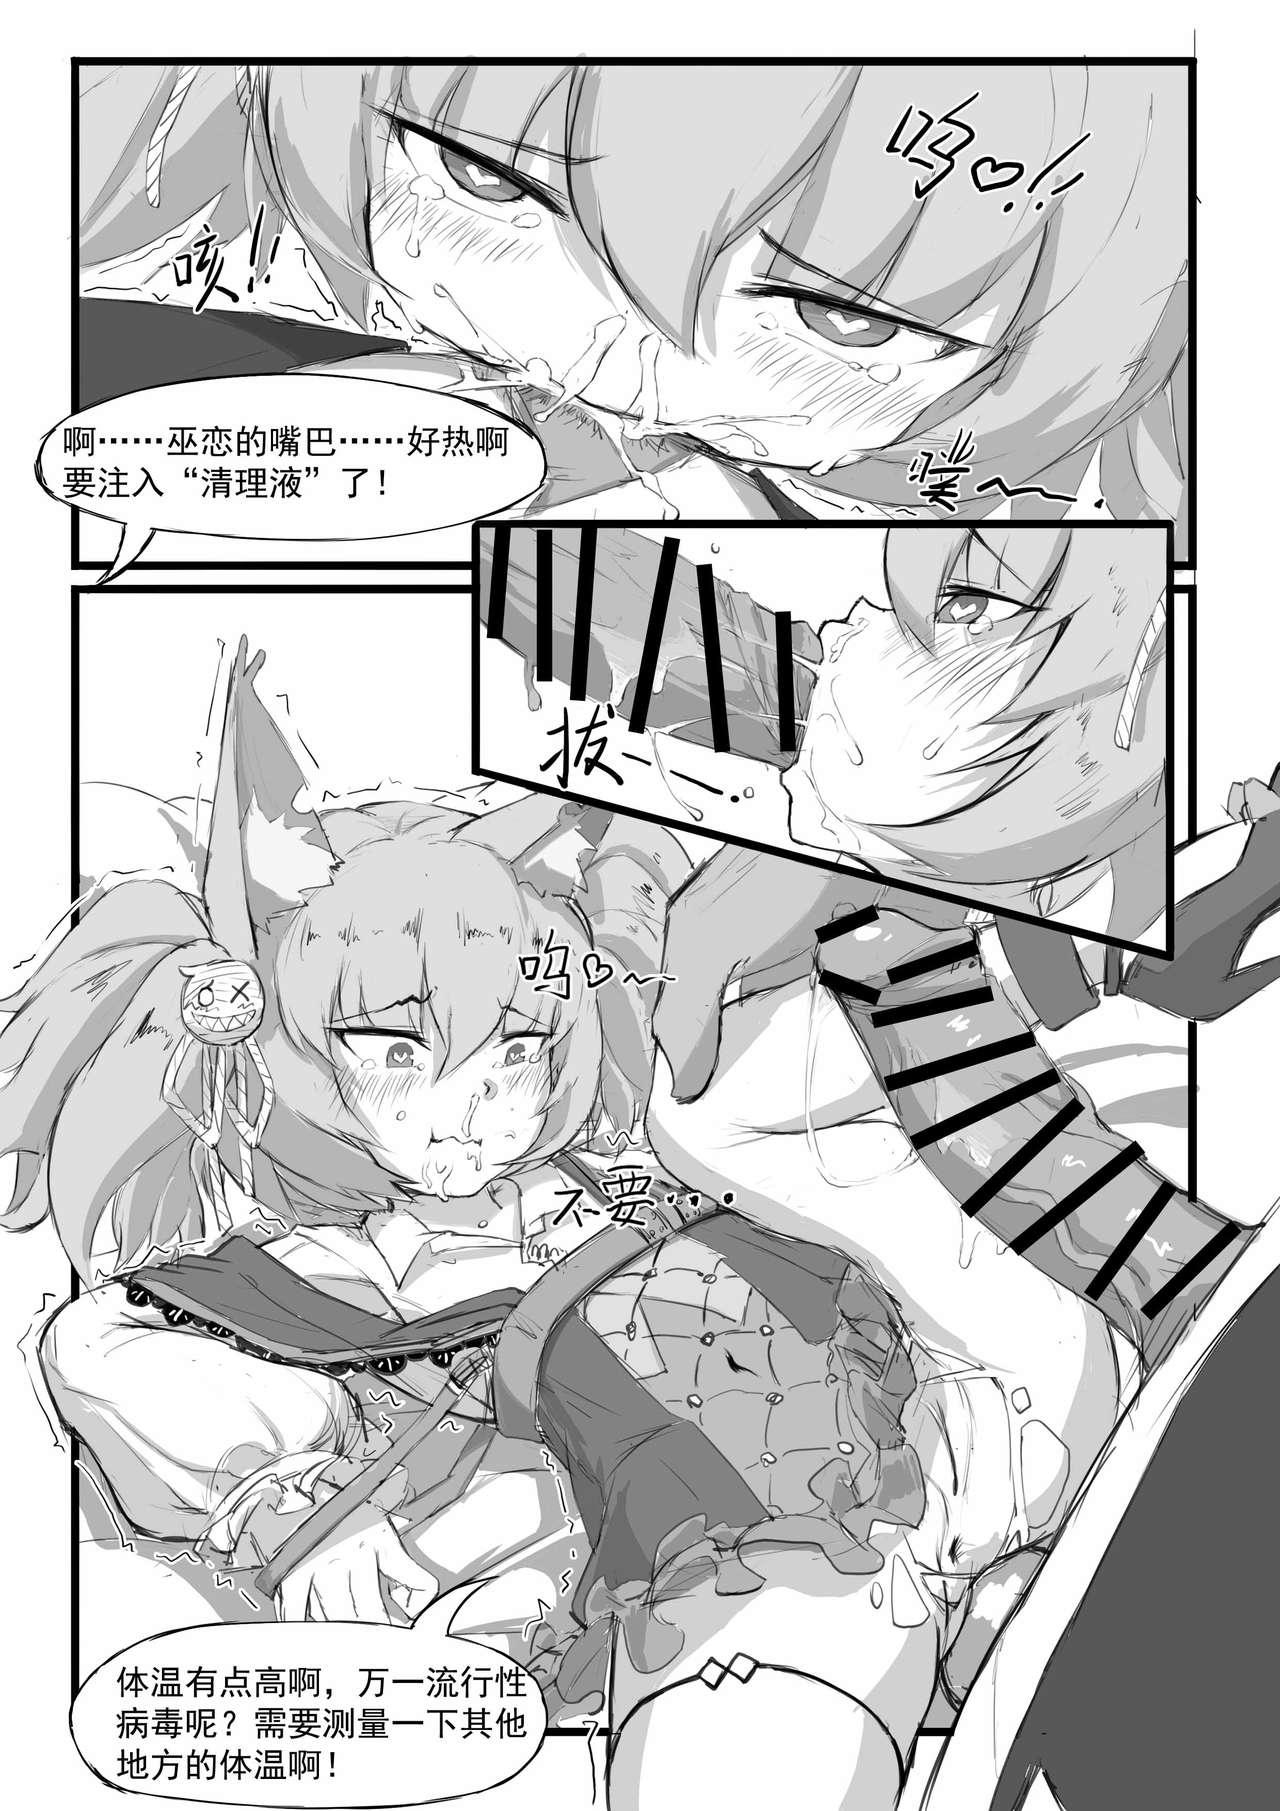 Picked Up 巫恋的入职体检 - Arknights Hardcore - Page 5